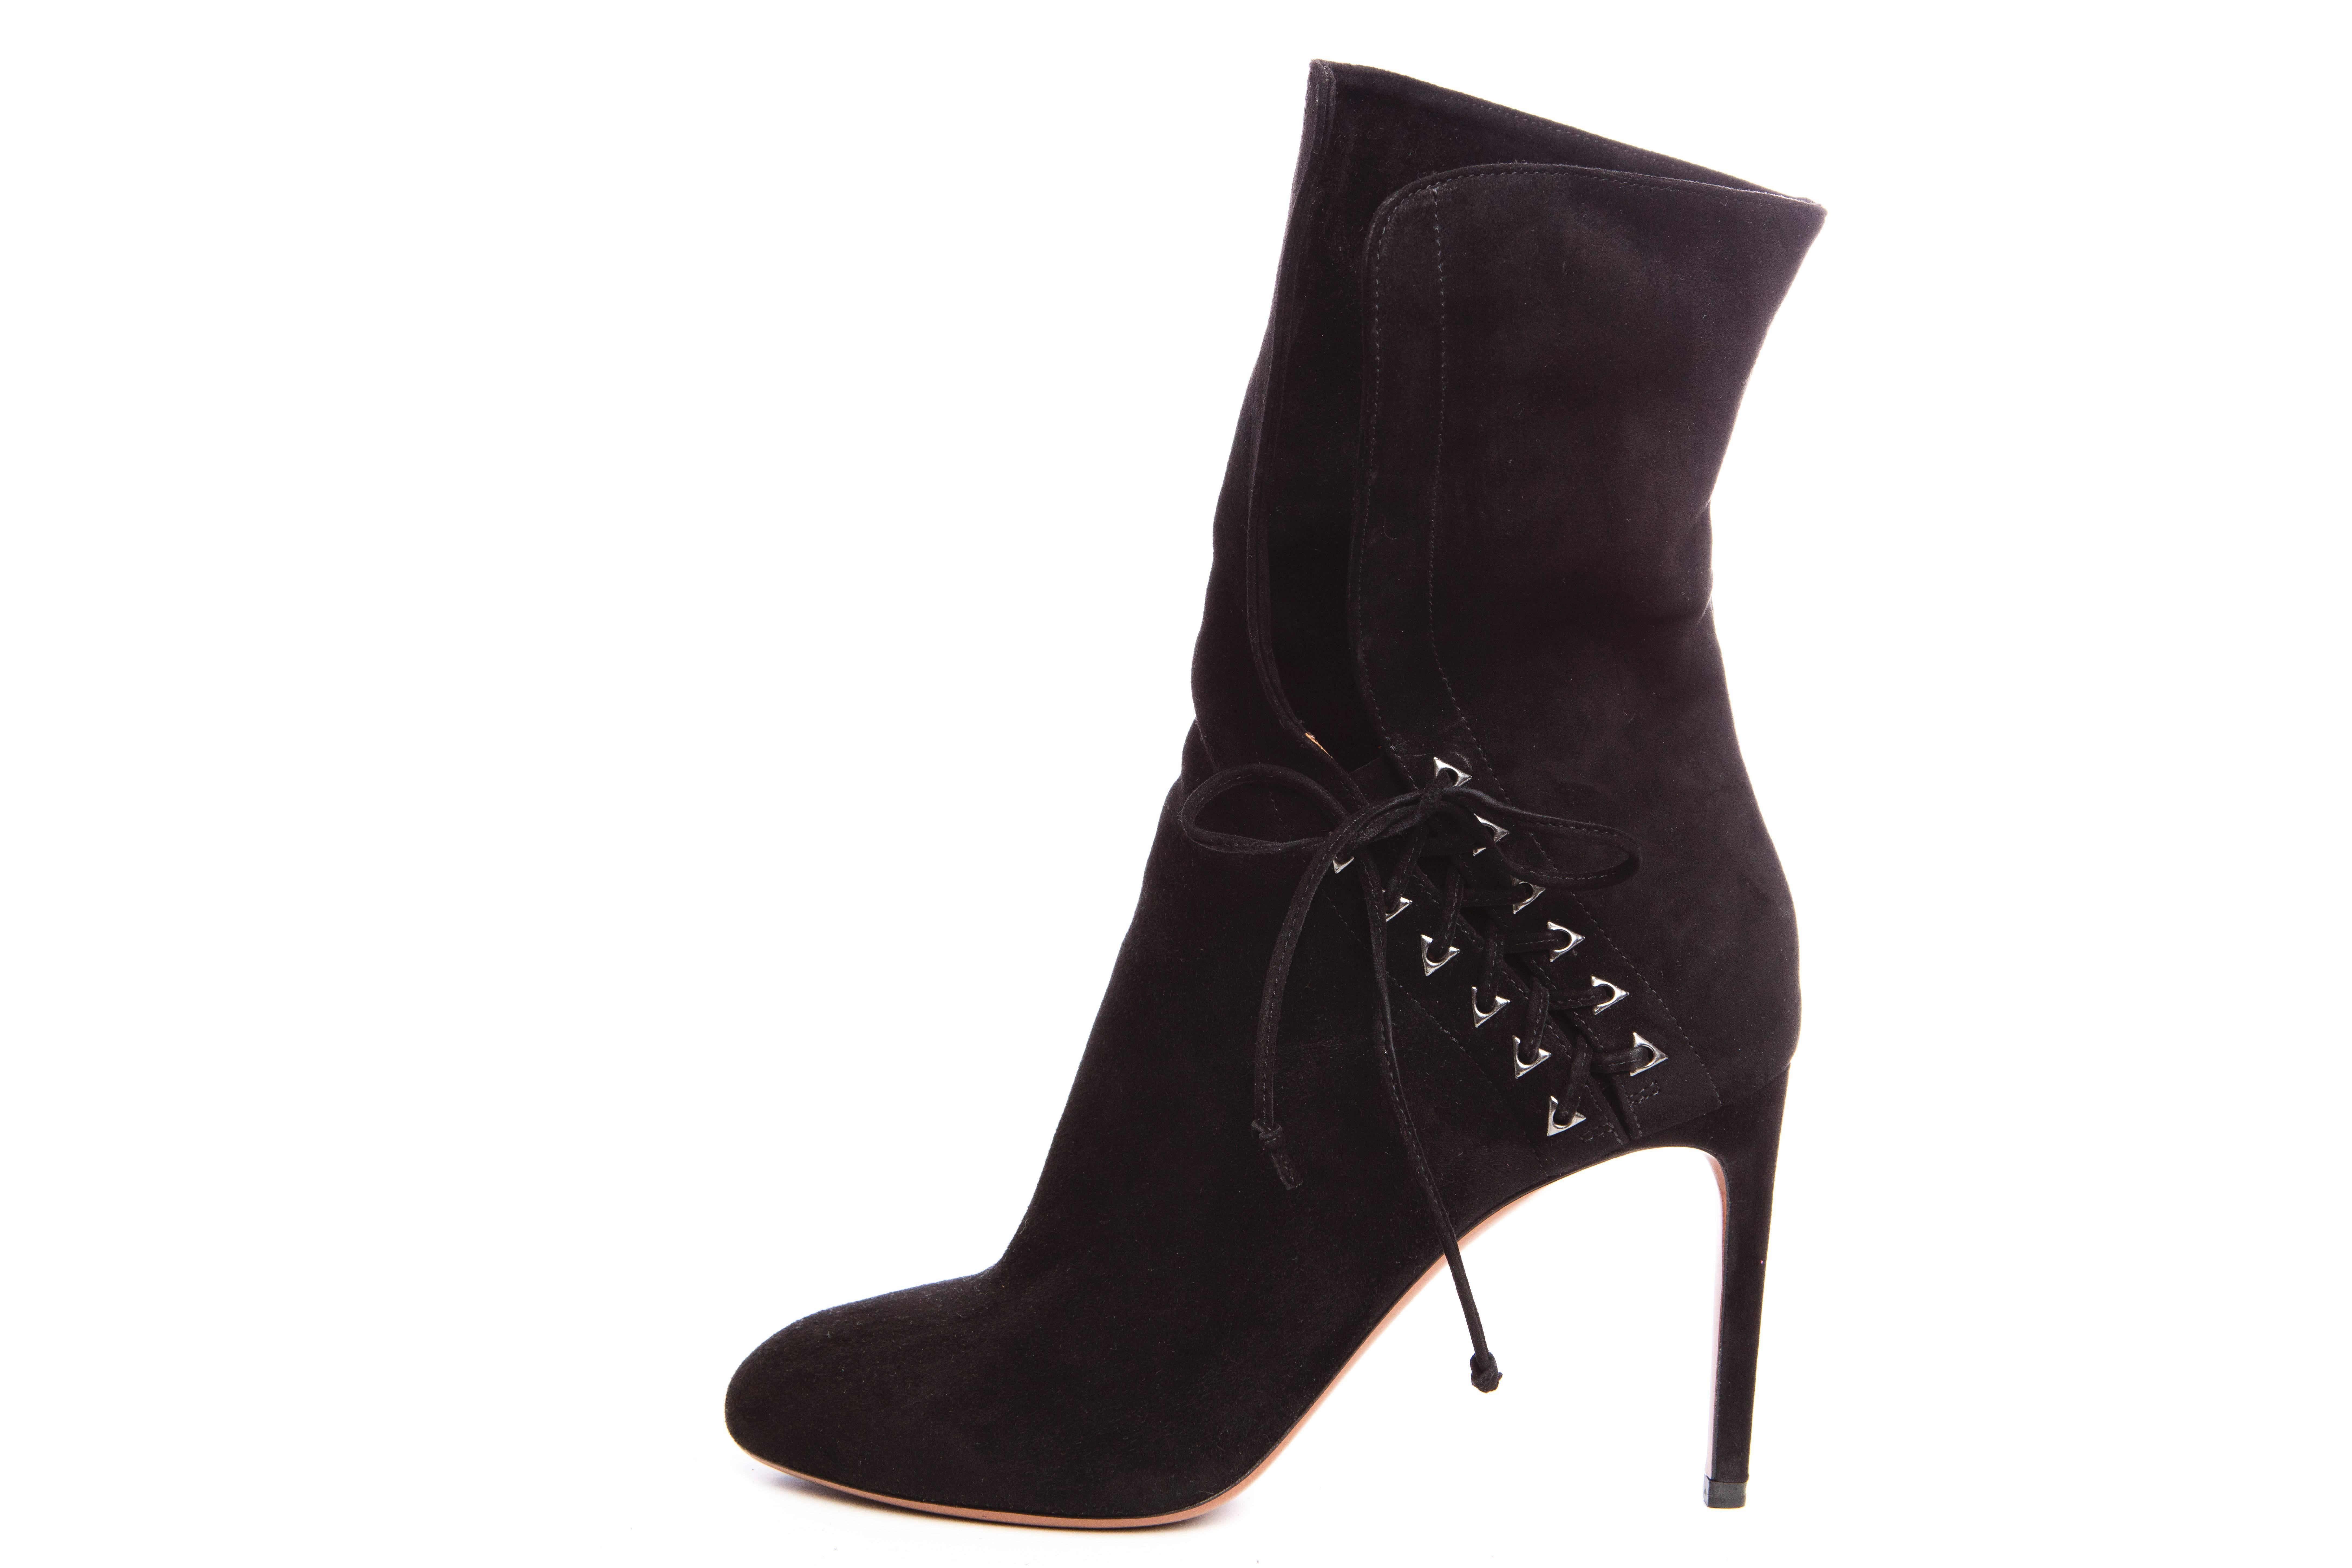 Azzedine Alaia,  black suede boots with side lace up.

EU. 39.5
US. 9.5